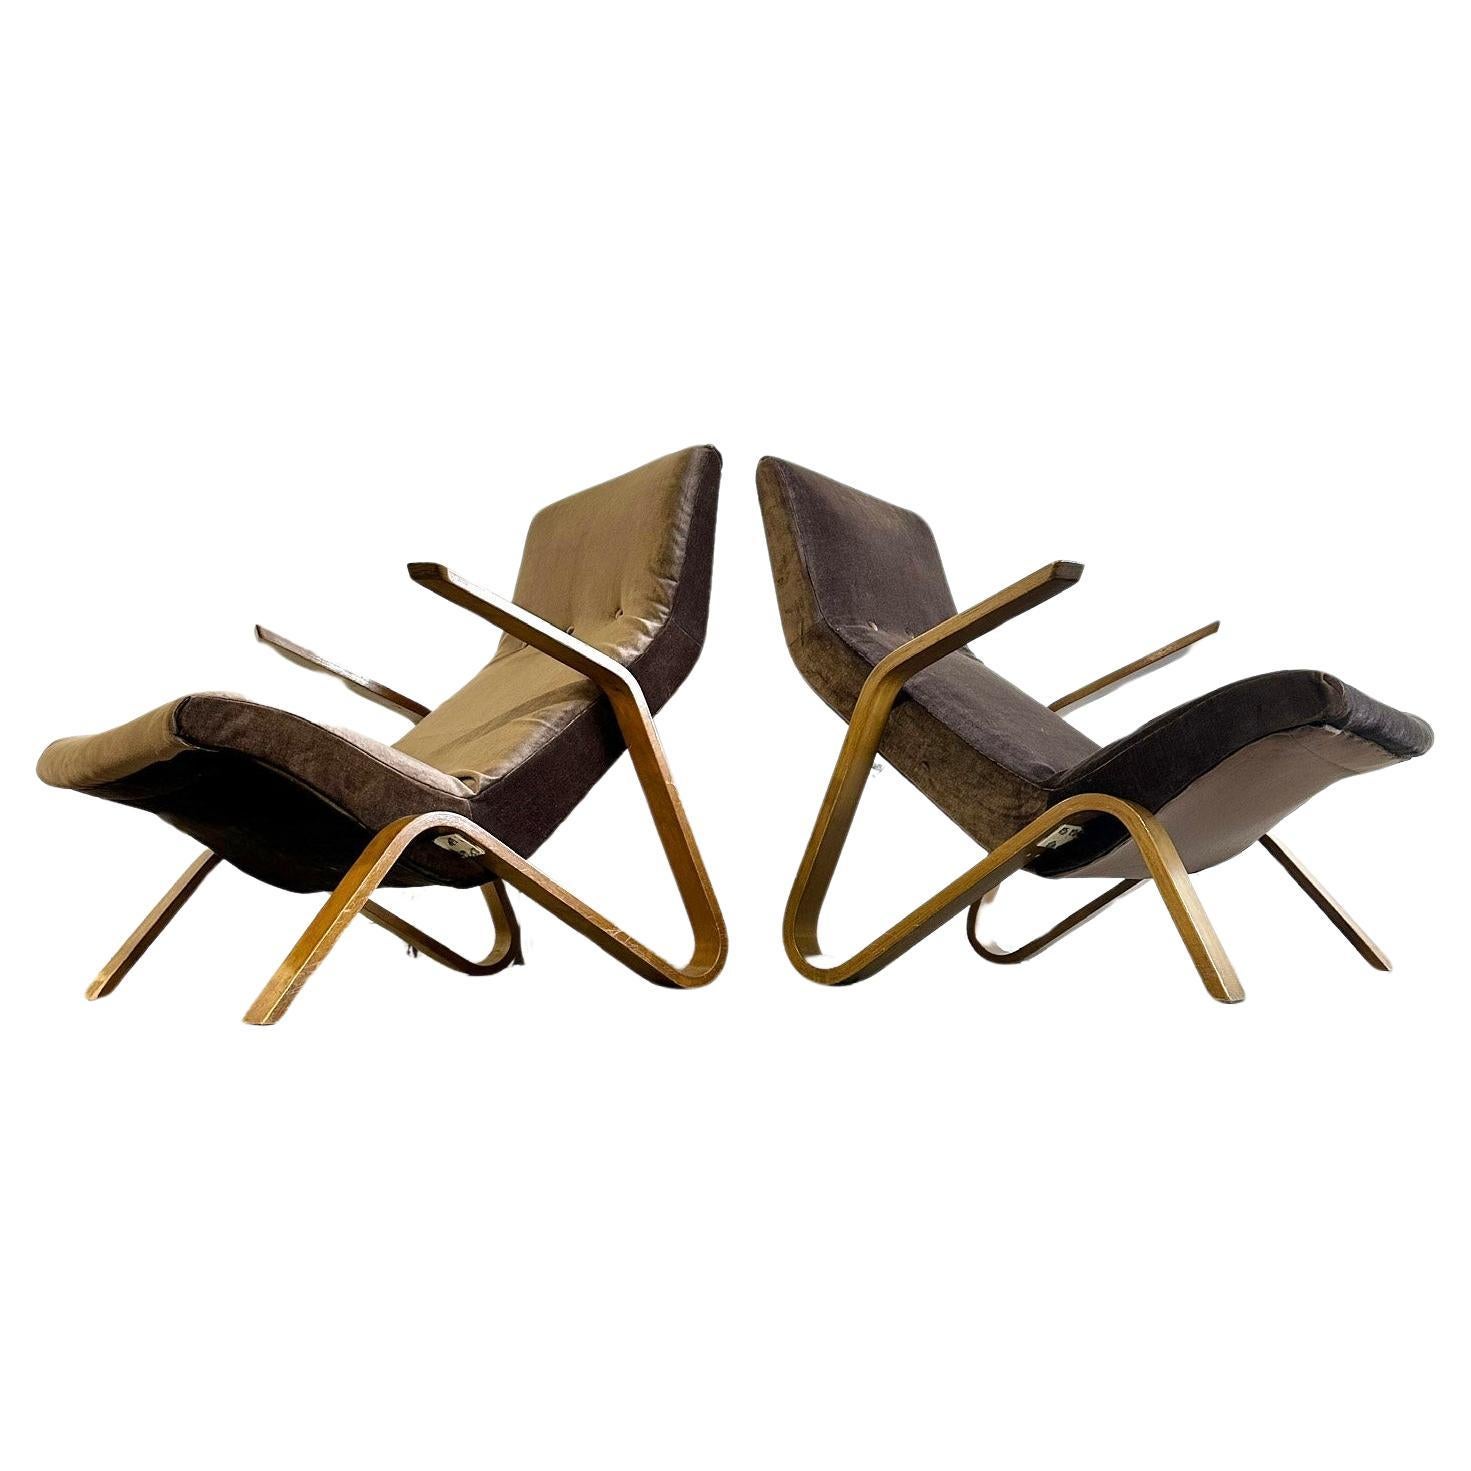 Eero Saarinen for Knoll Model 61 Grasshopper Mid Century Lounge Chairs - a Pair